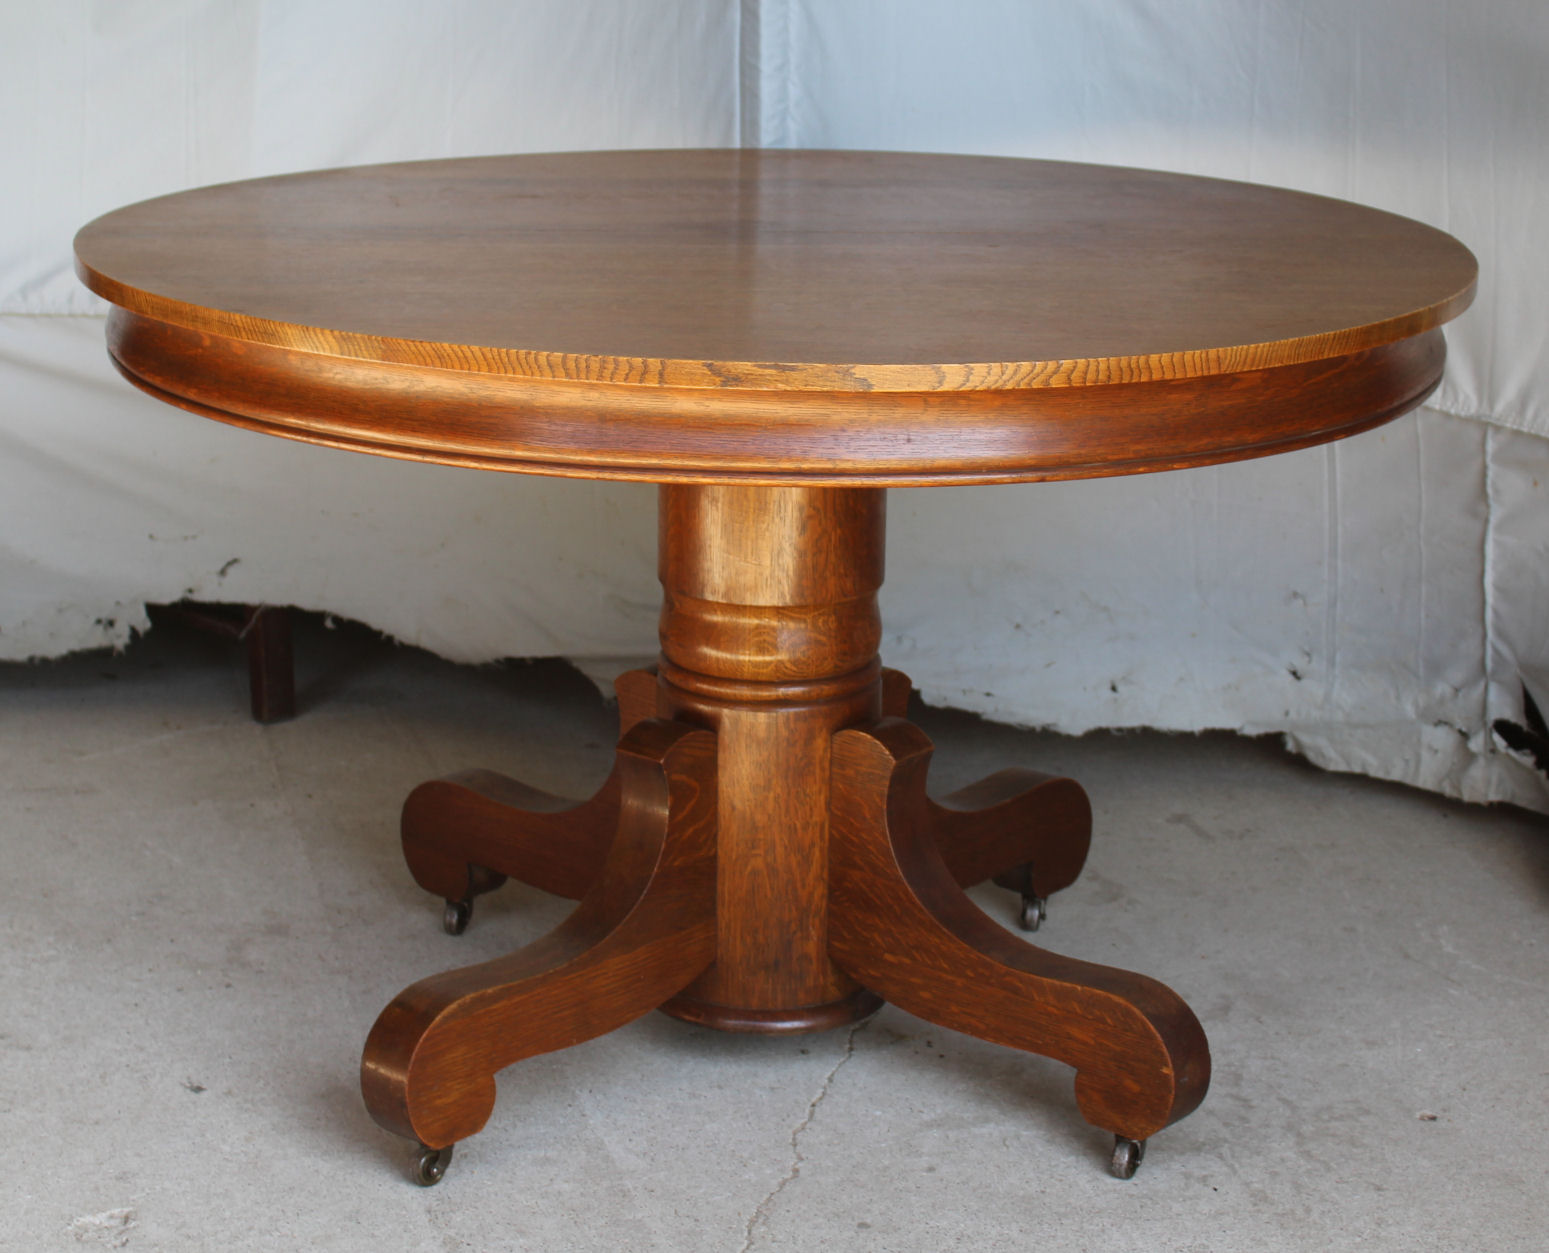  small antique round table